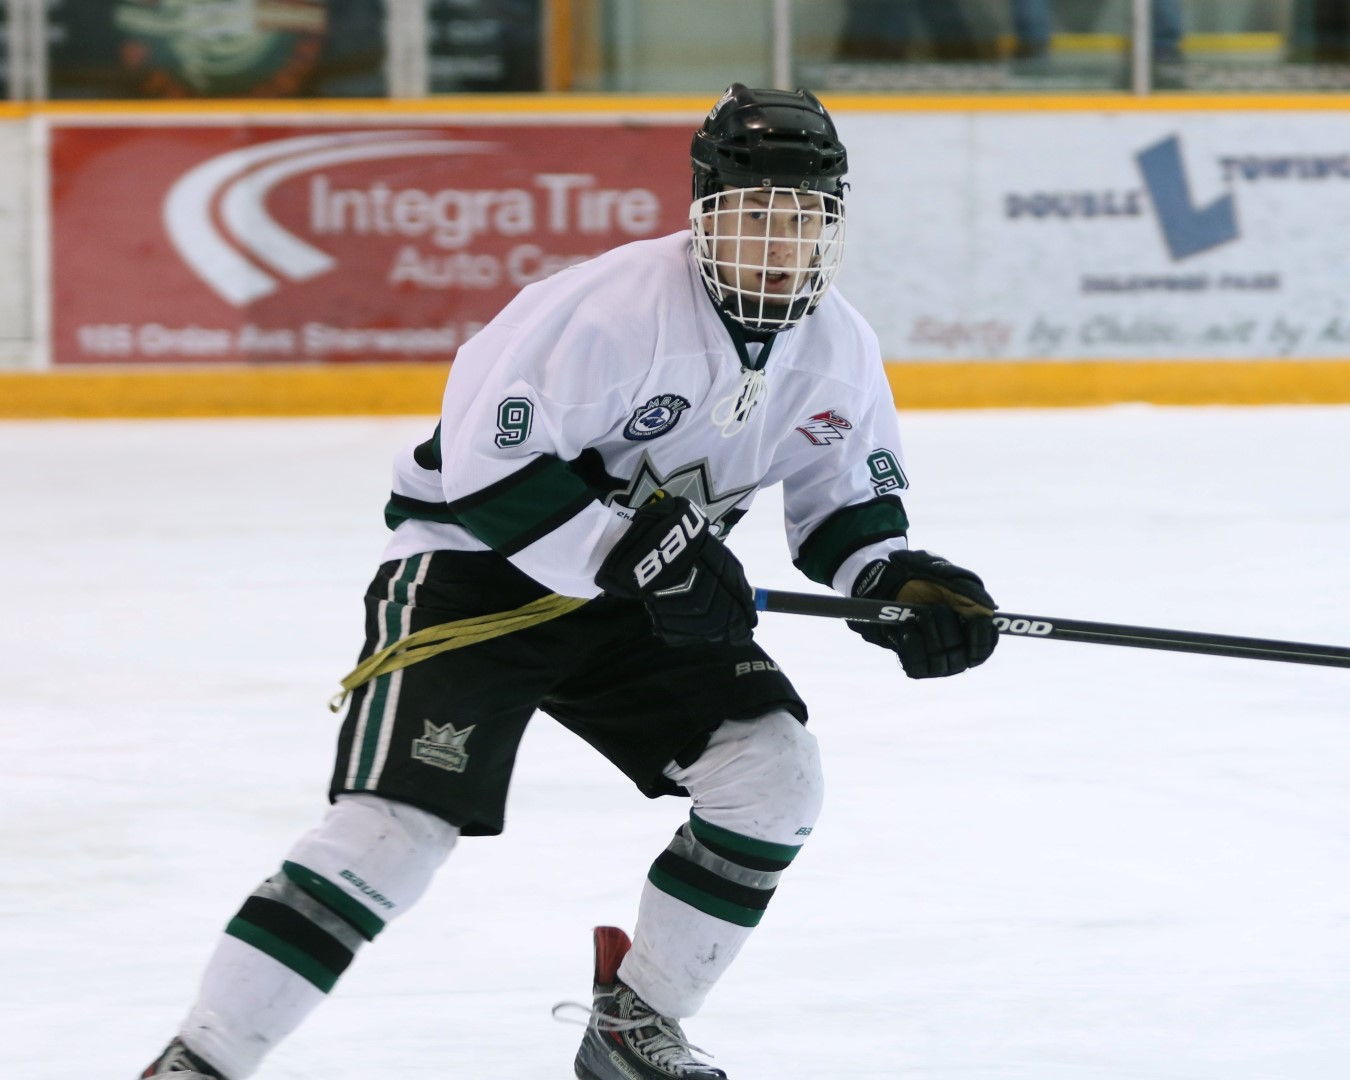 Sherwood Park Flyers forward Ethan Browne was selected by the Silvertips in the first round of the WHL bantam draft Thursday.